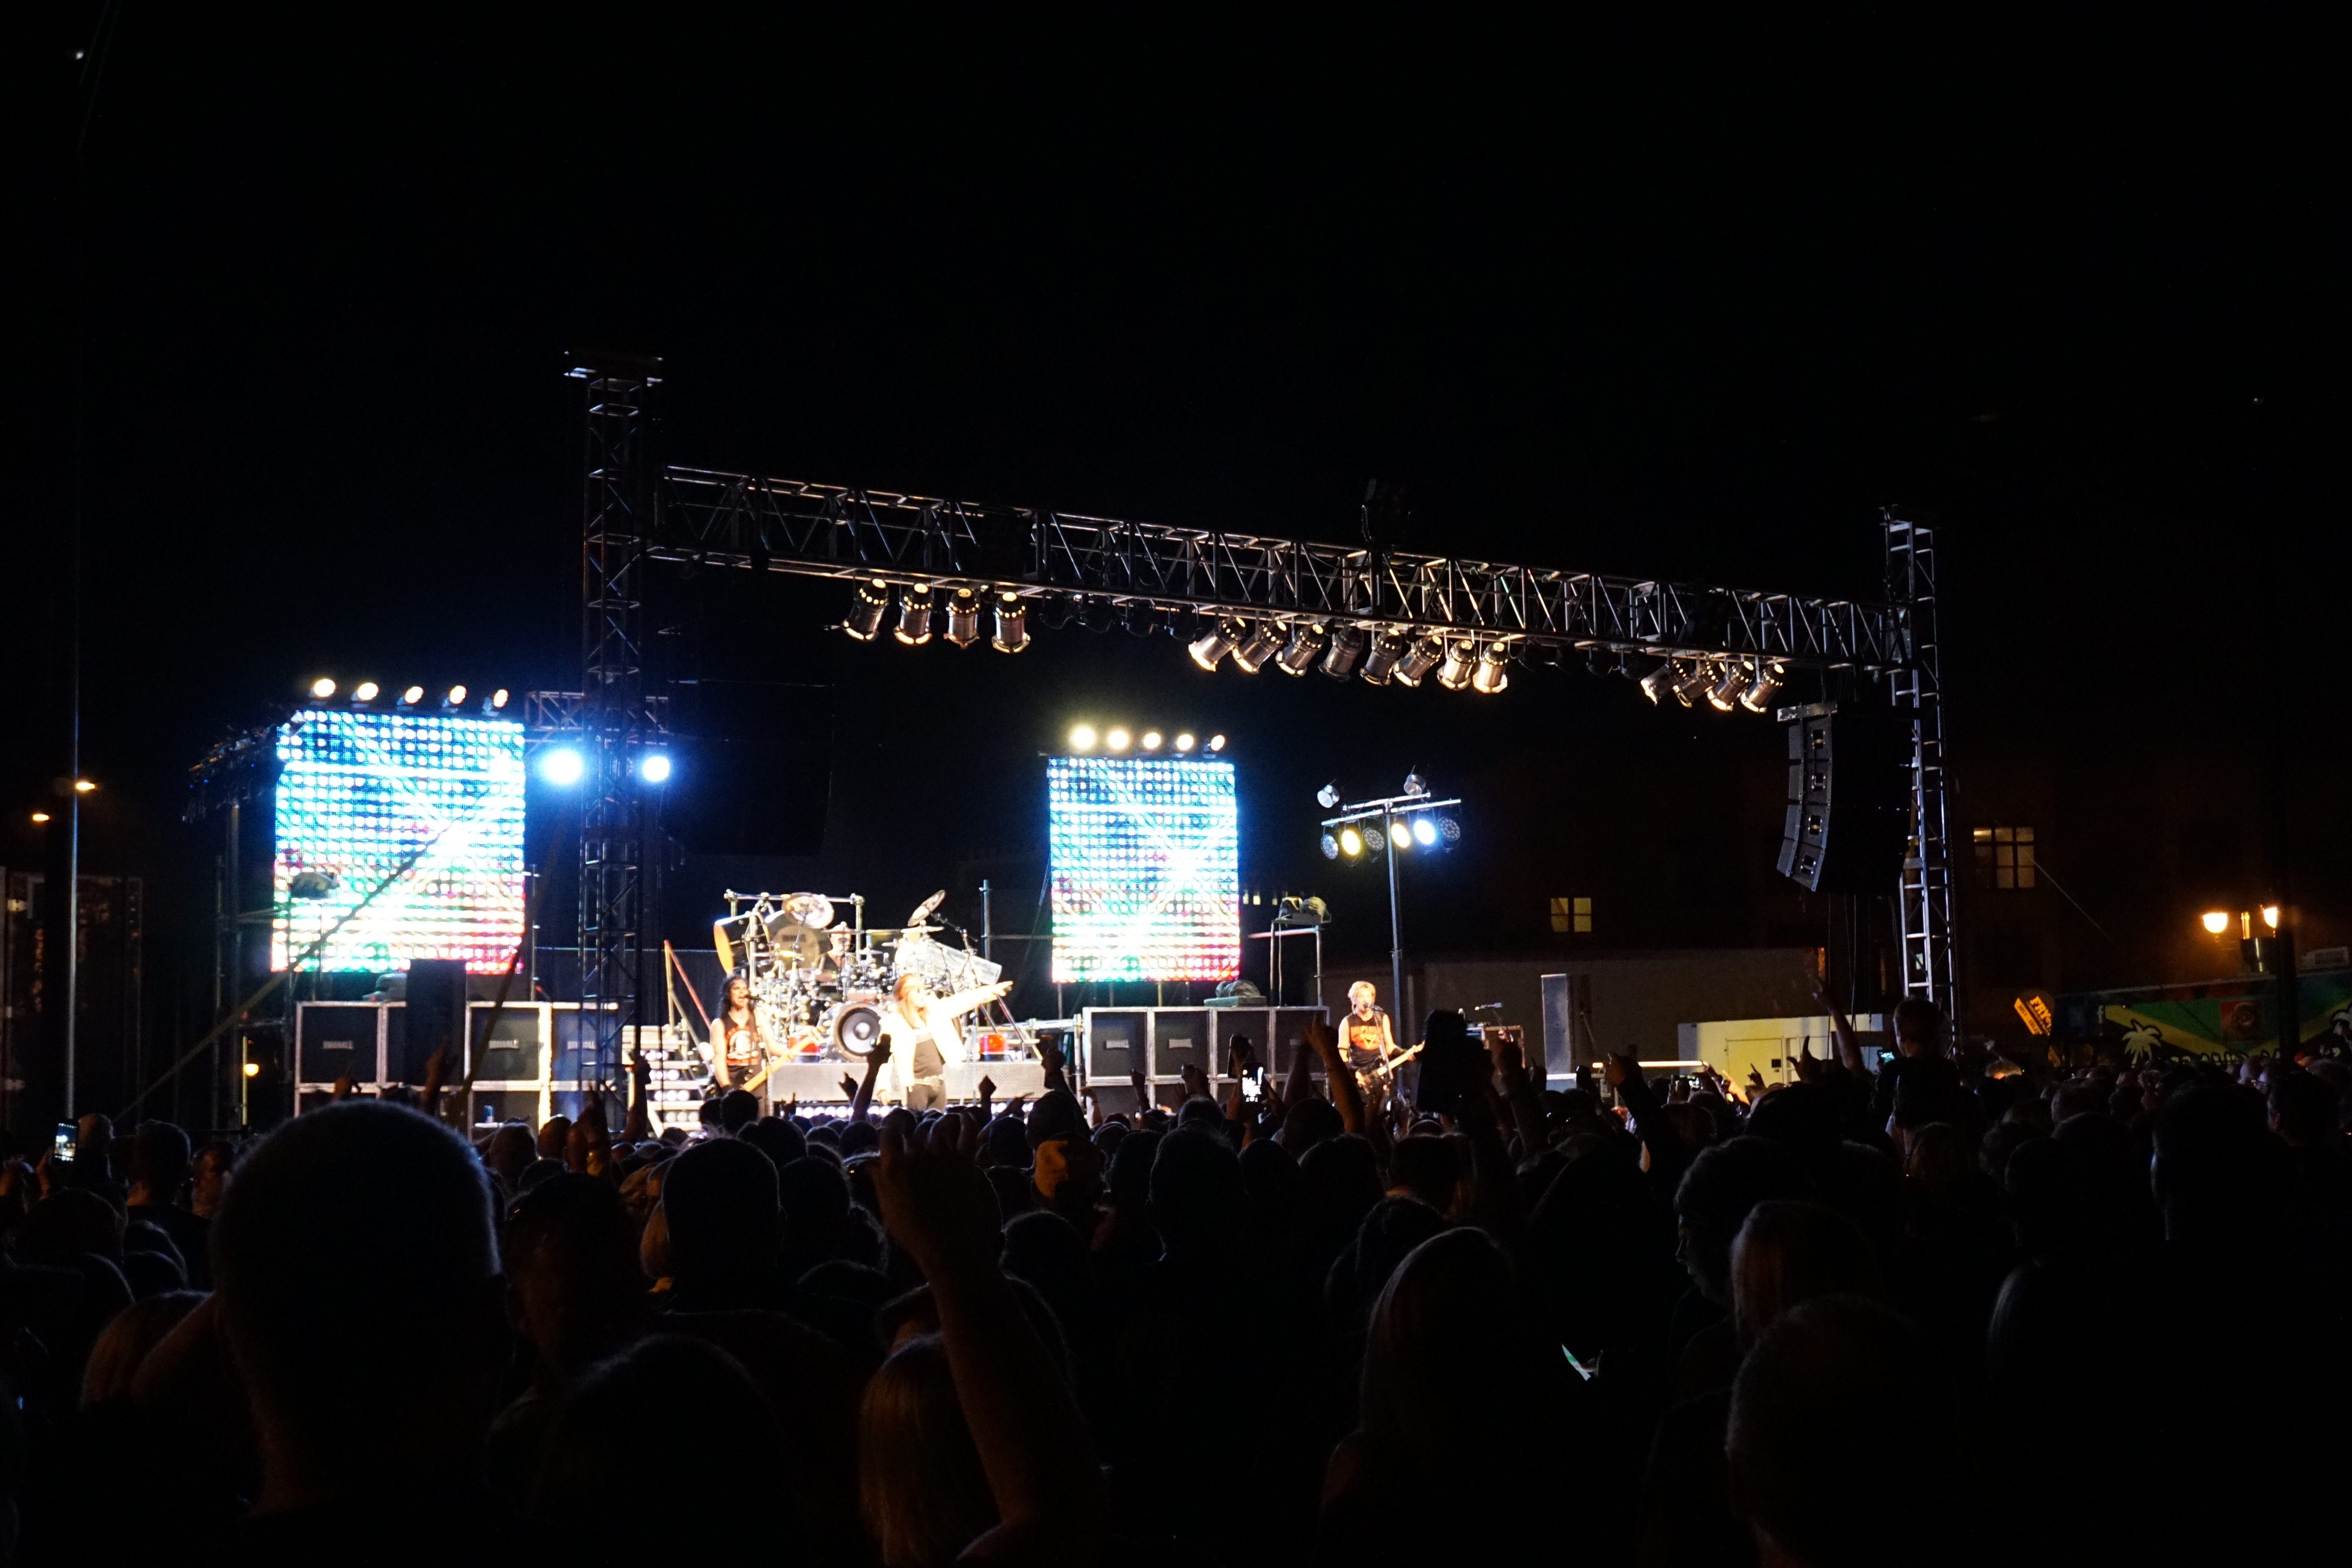 Full stage of Hairball cover band playing on stage at FRYfest block party